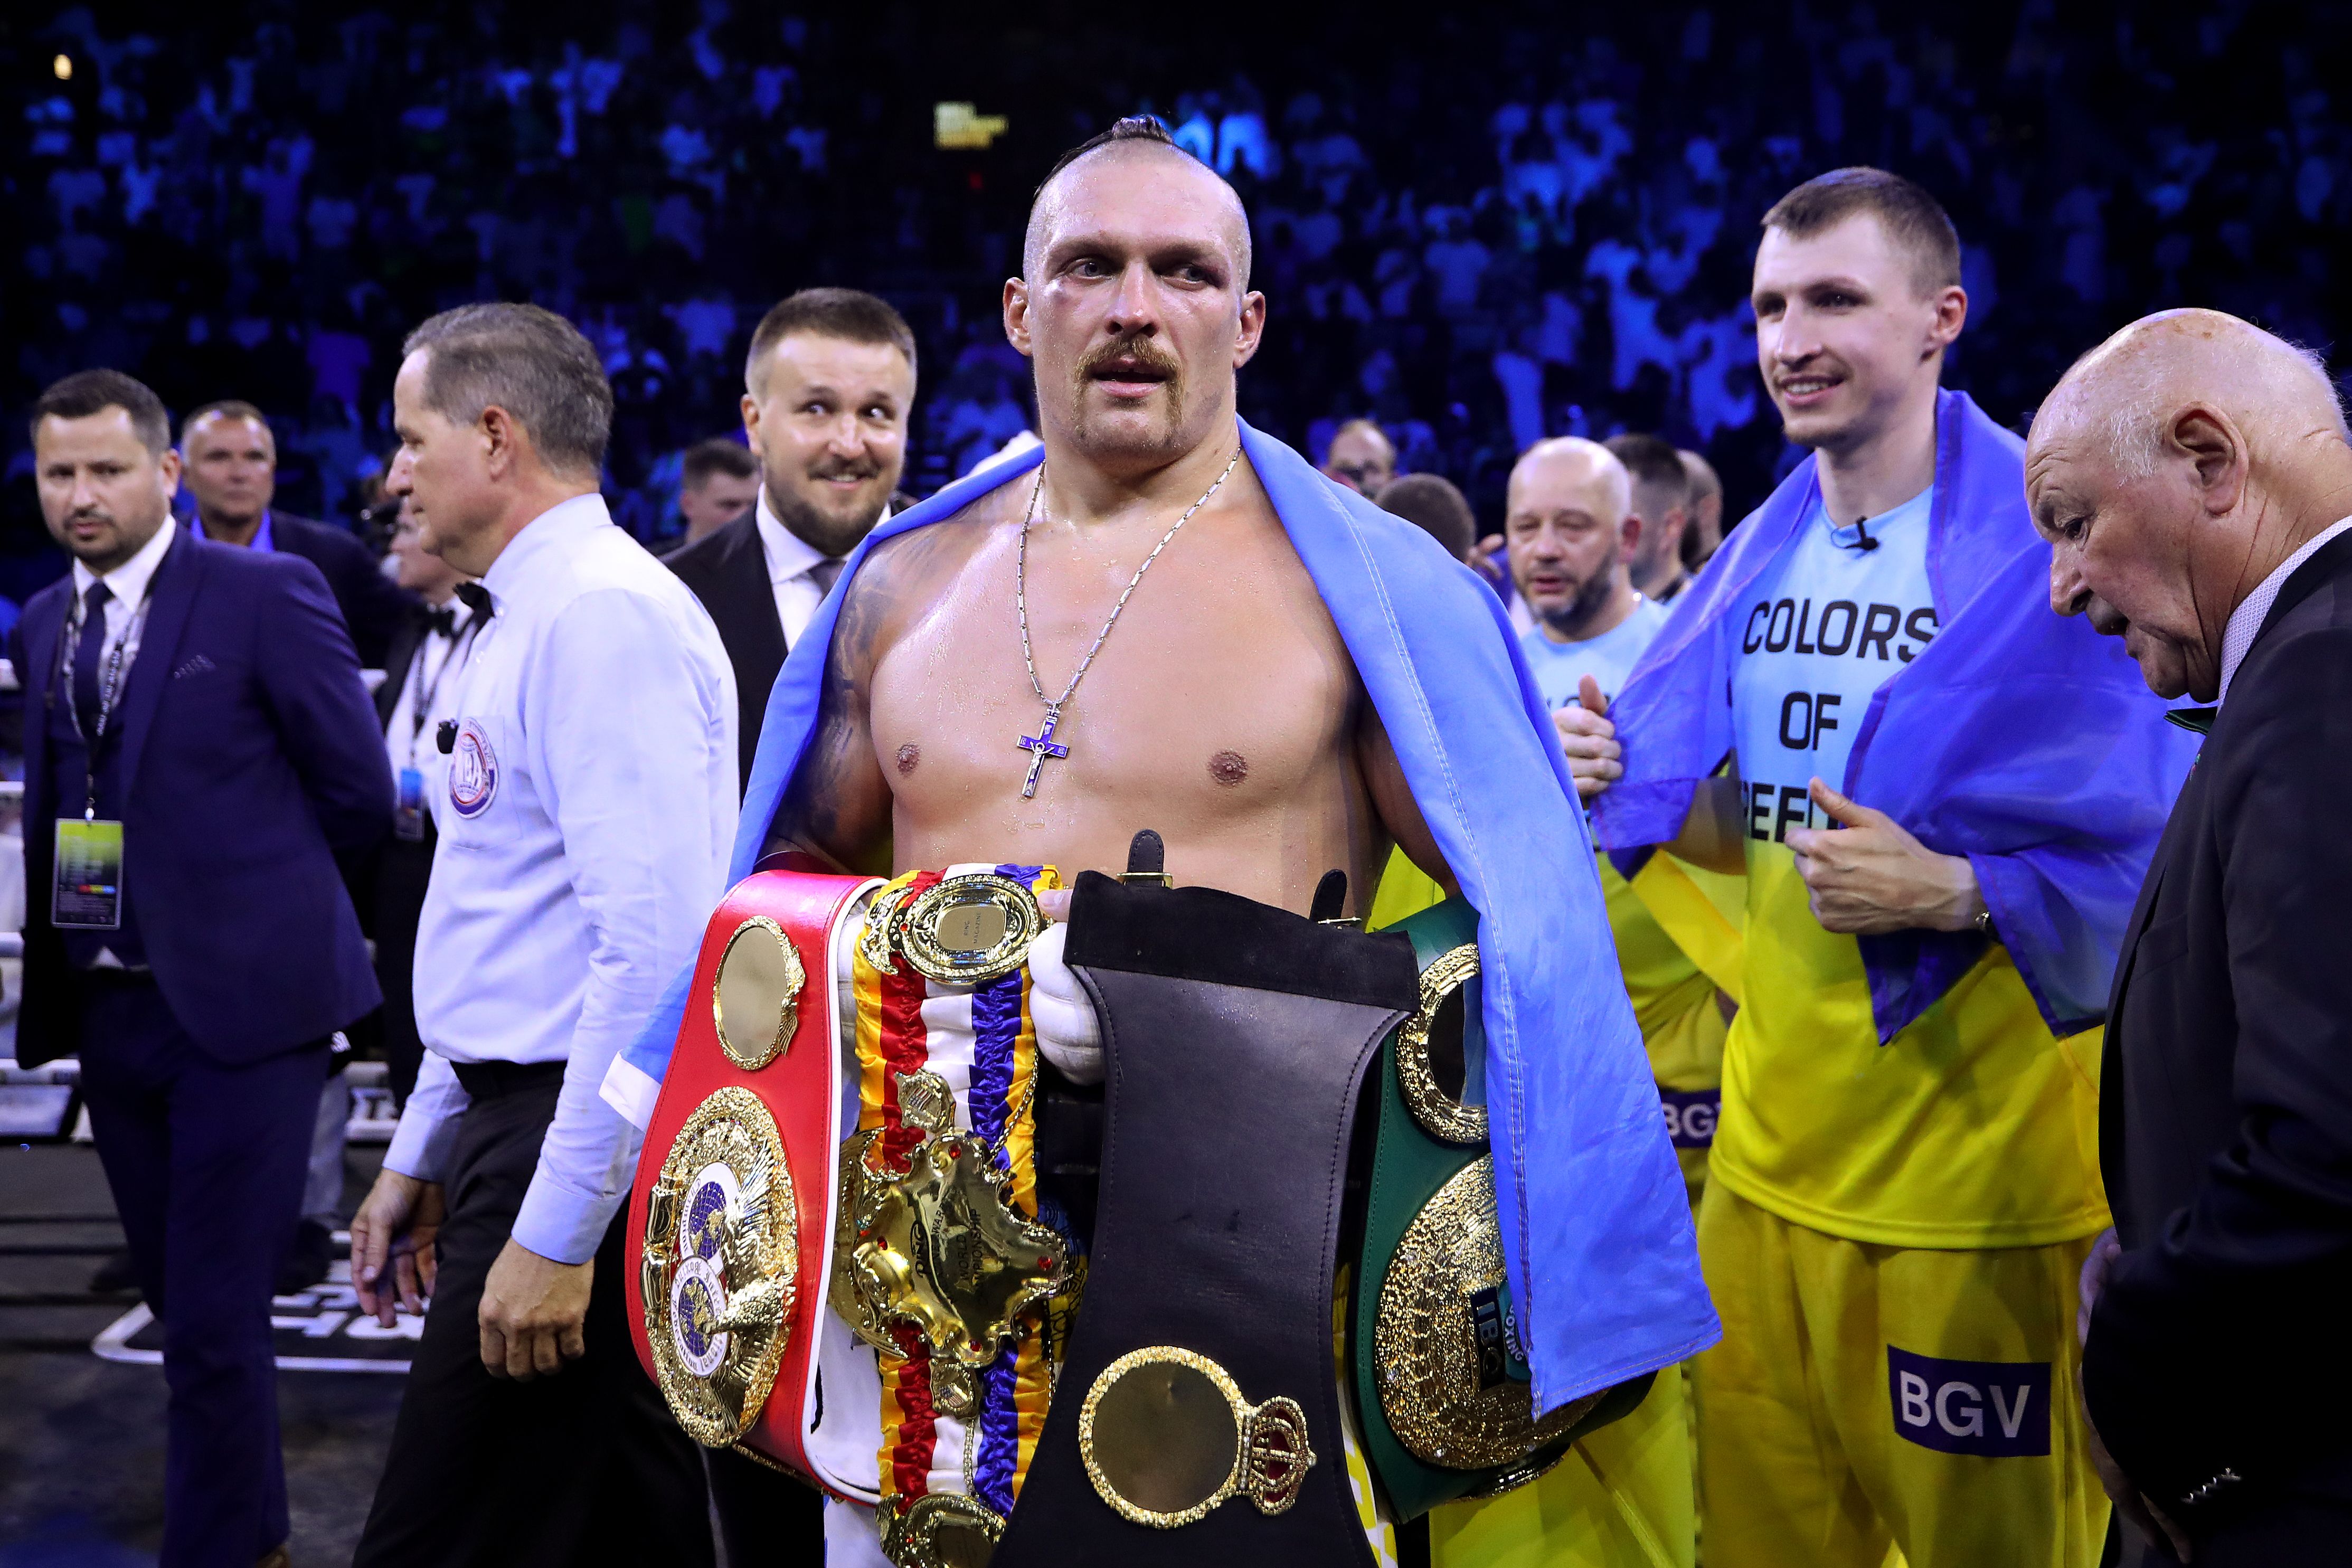 Oleksandr Usyk wants to become undisputed heavyweight champion by the end of 2023